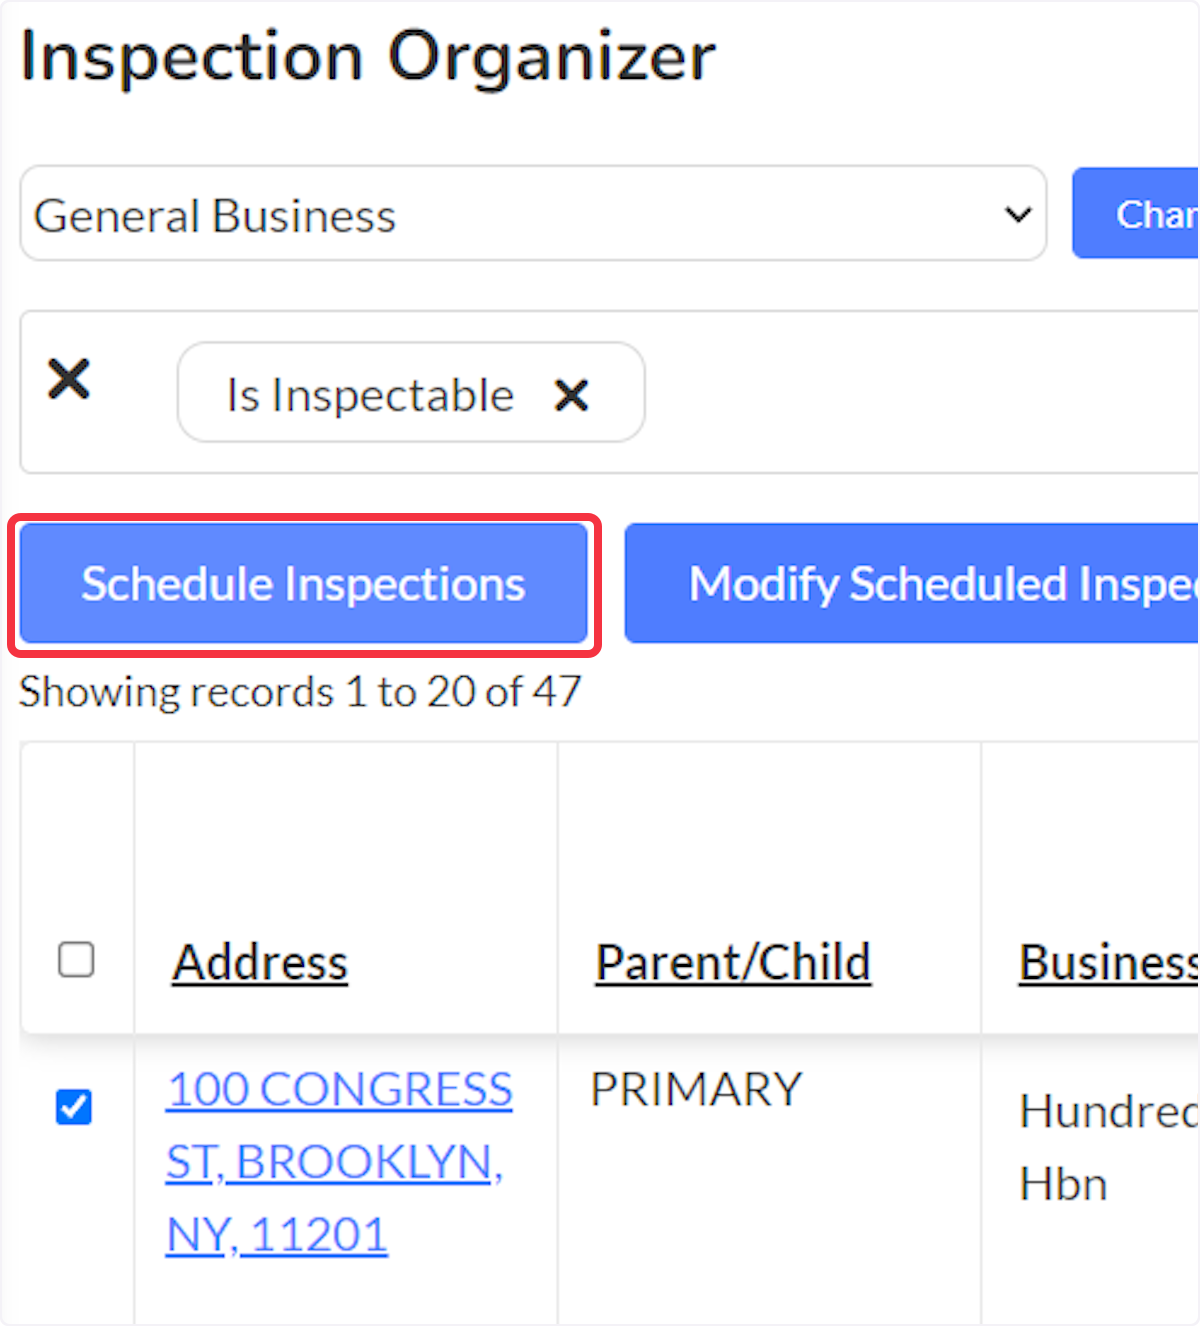 Click on Schedule Inspections